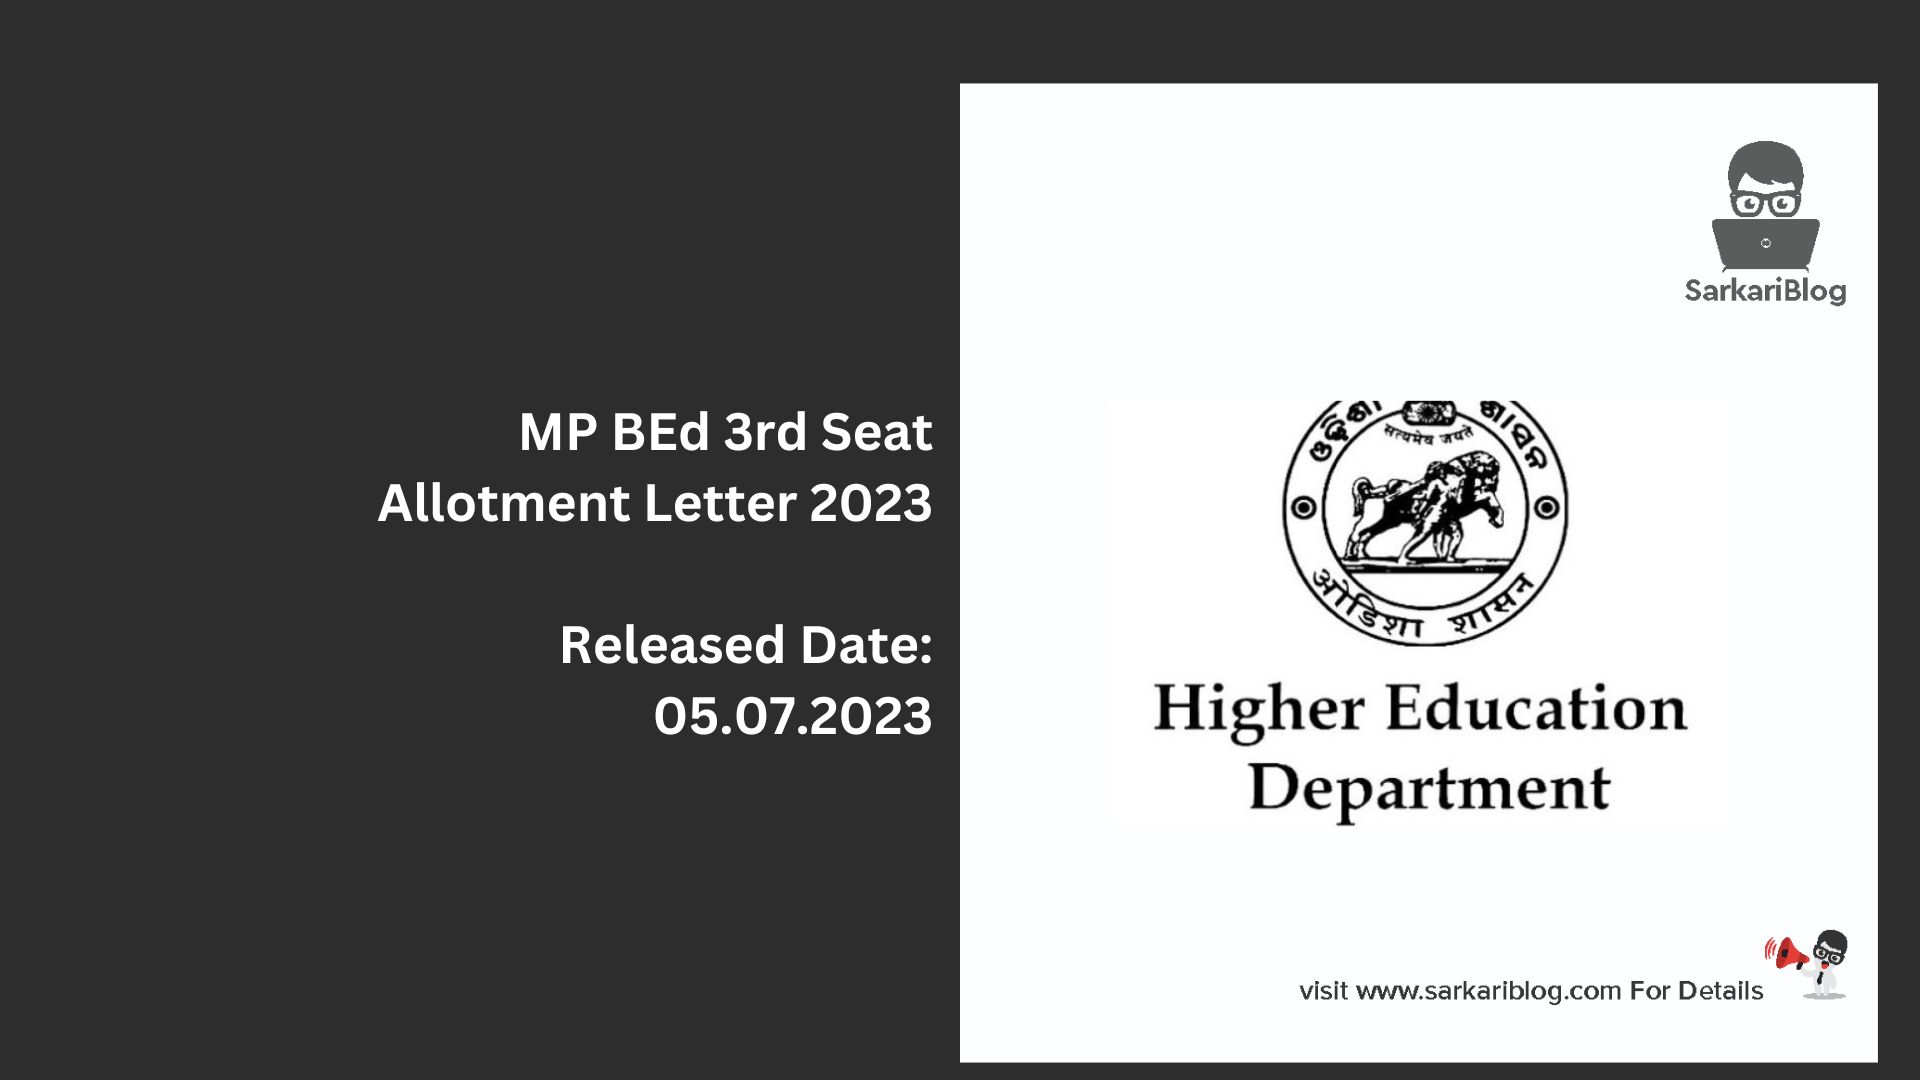 MP BEd 3rd Seat Allotment Letter 2023